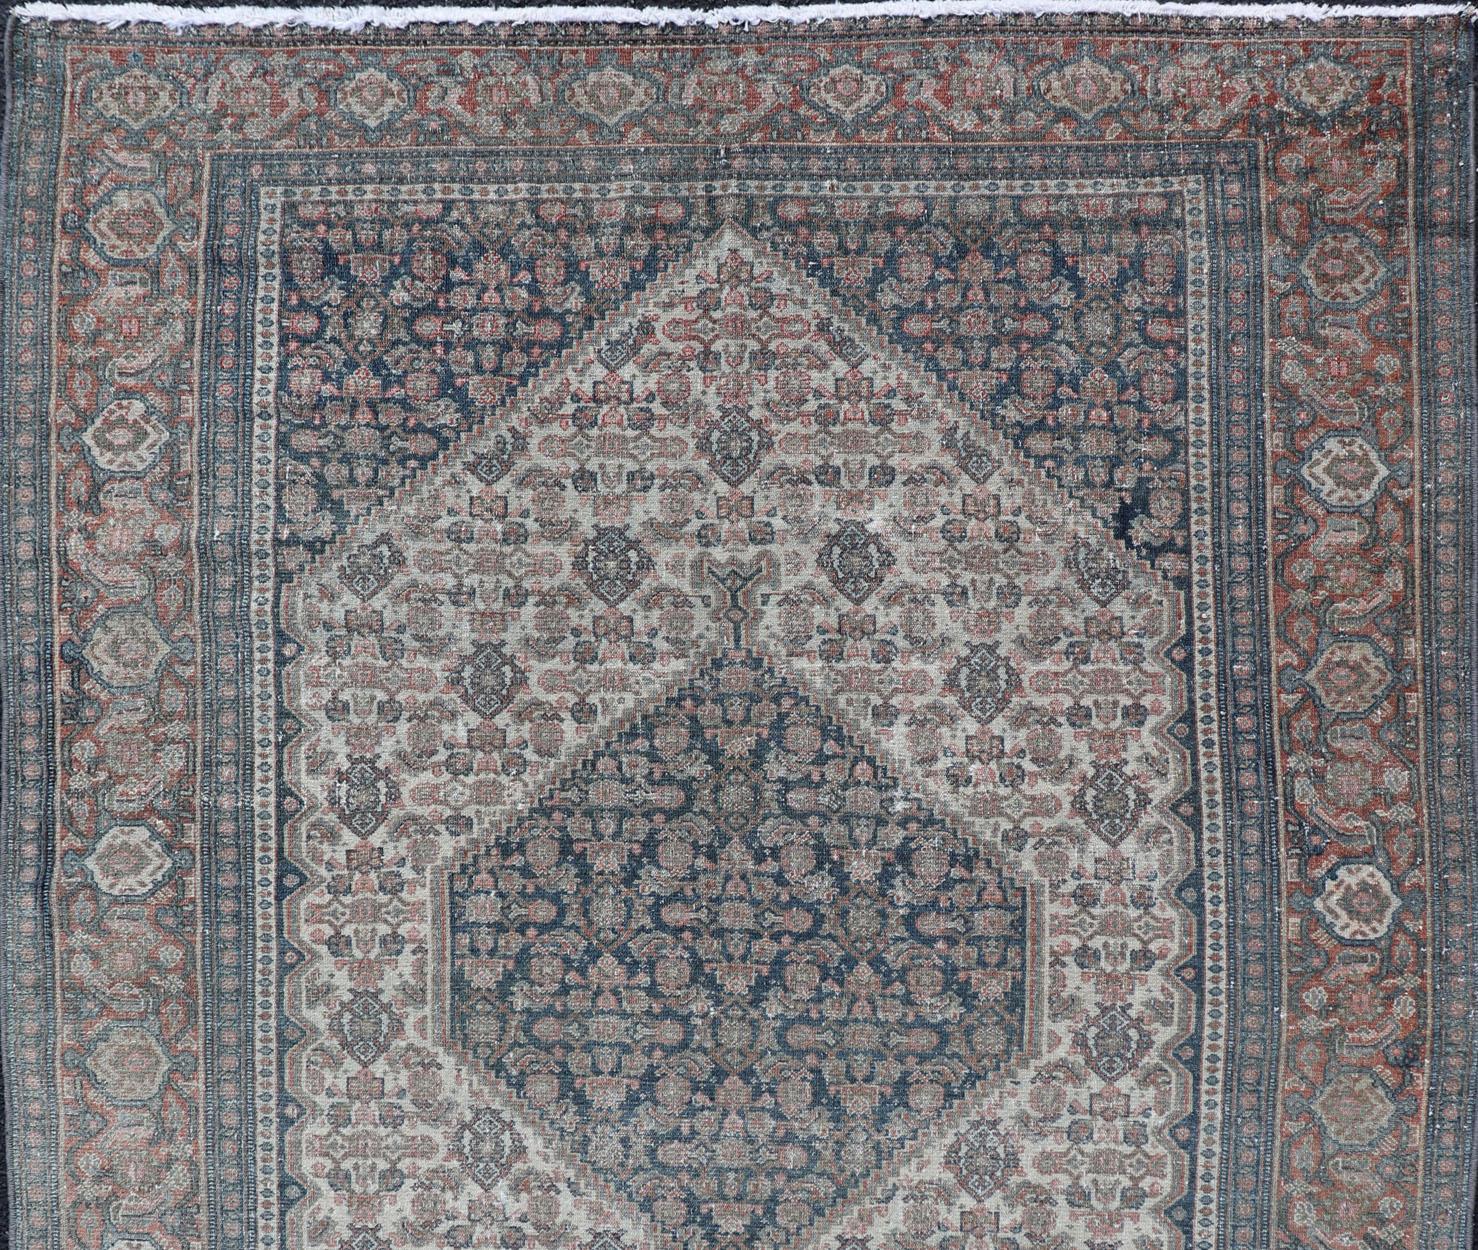 Medallion geometric design Senneh antique rug from Persia in various color tones, rug R20-0822, country of origin / type: Iran / Senneh, circa 1910.

This incredible antique Persian Senneh rug was handwoven circa 1910 and bears a remarkably unique